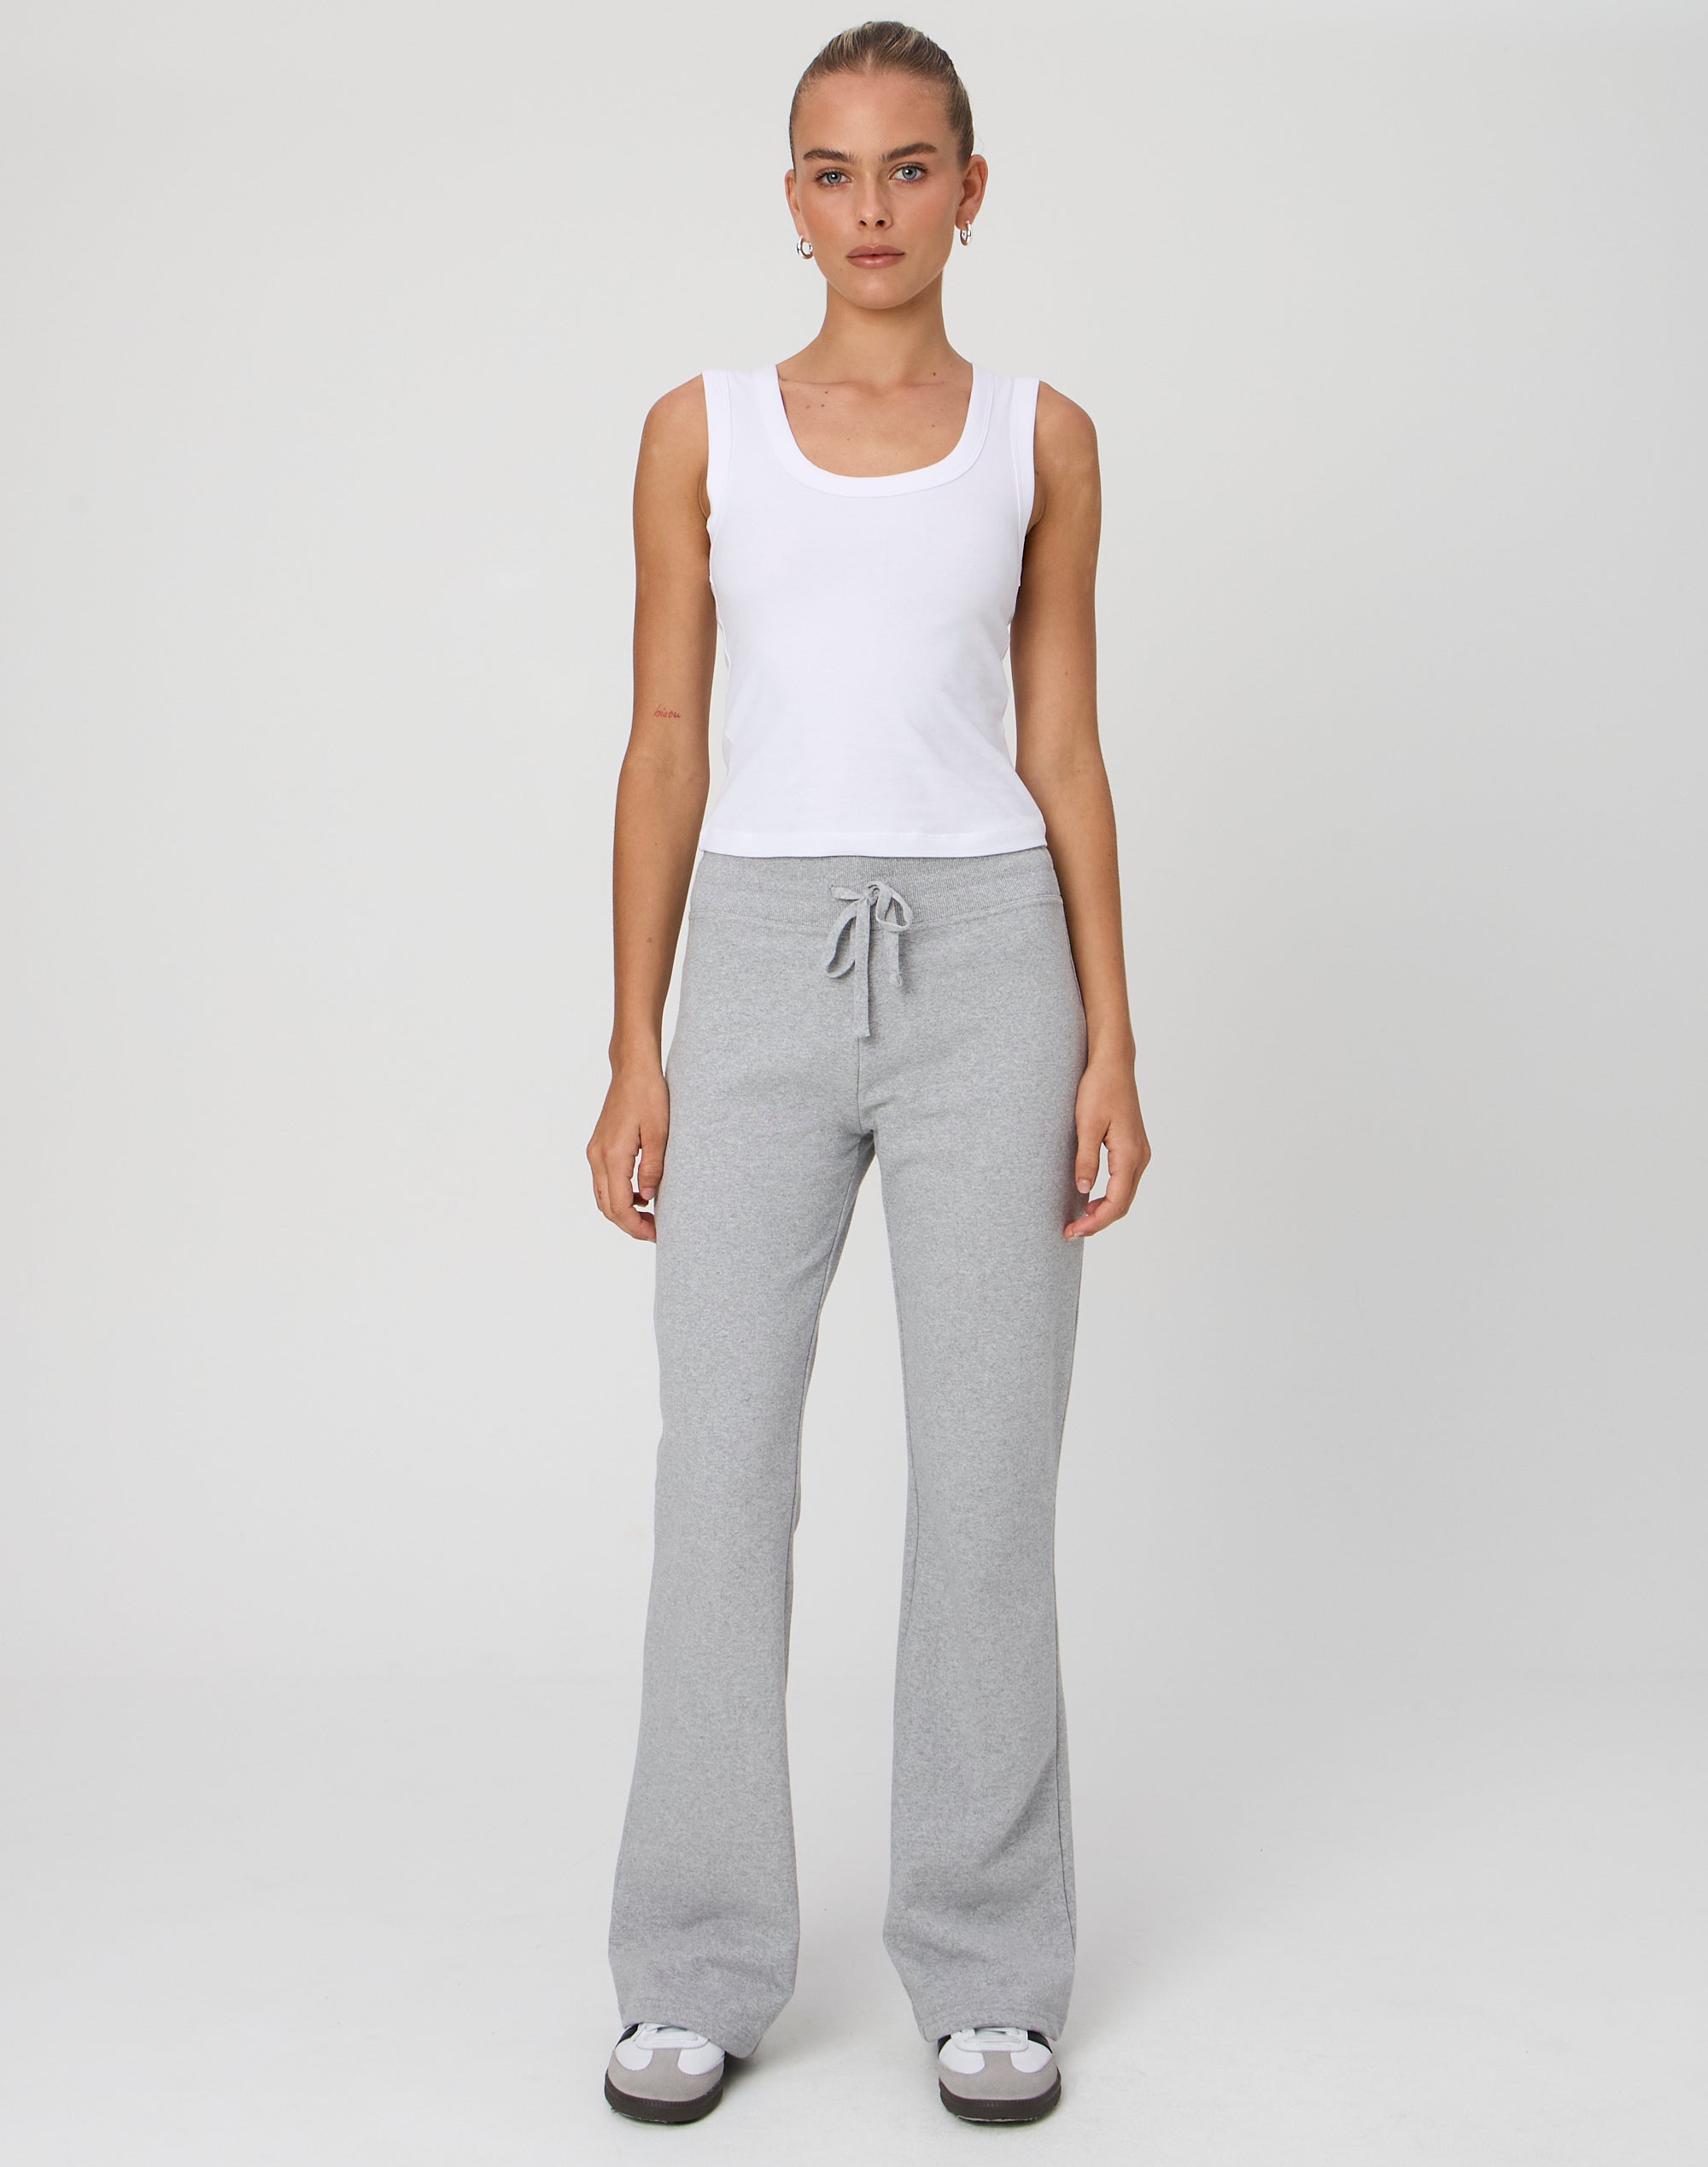 Wide Leg Jogger in Pale Grey Marle